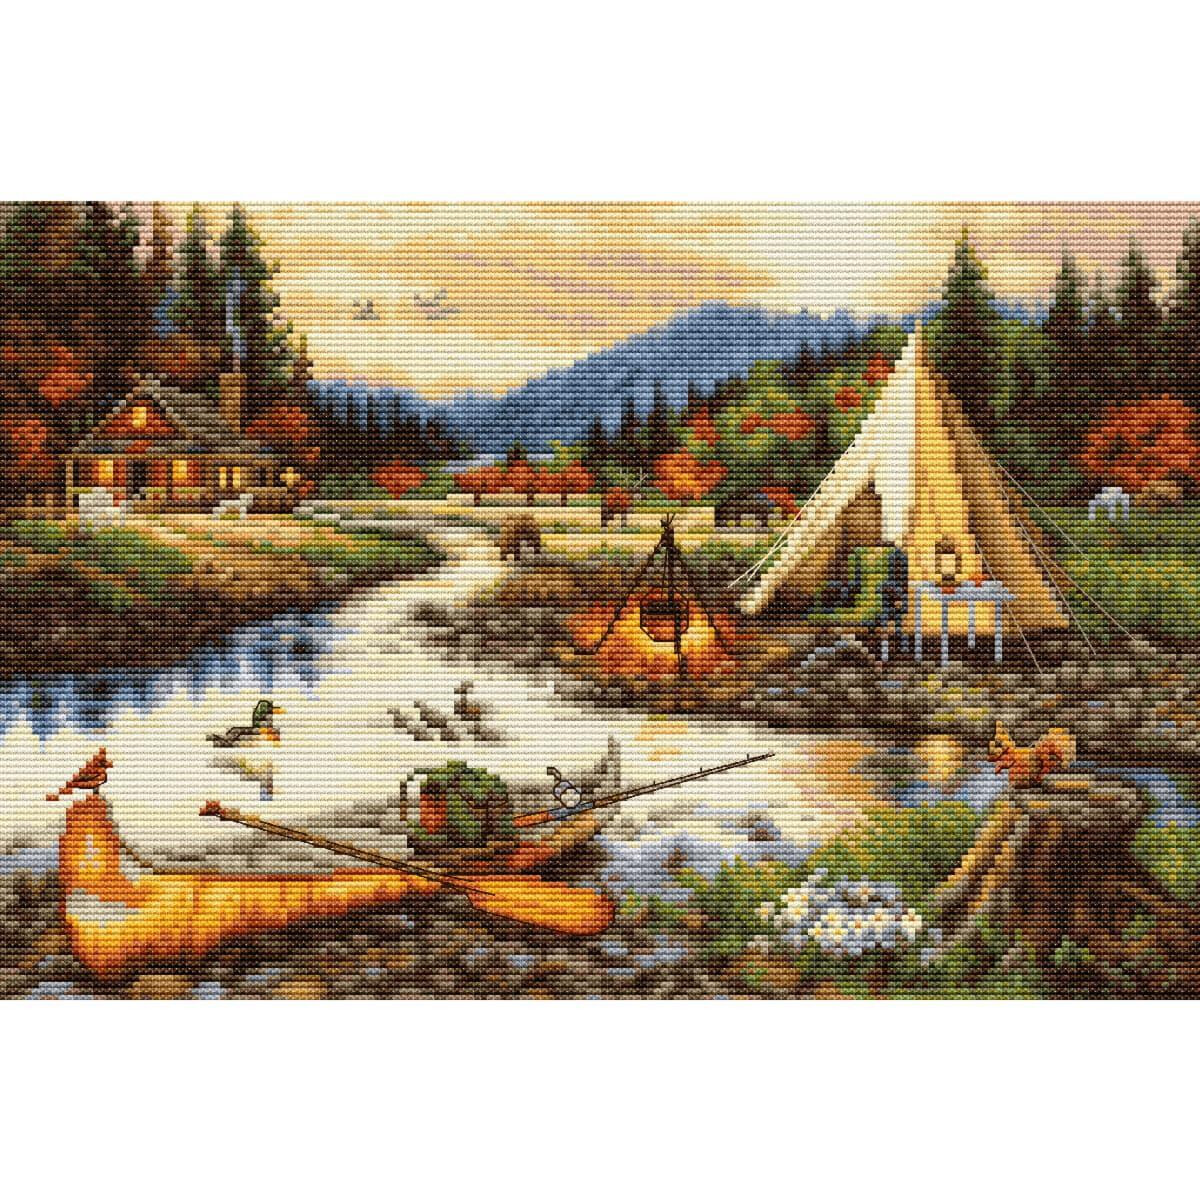 Luca-S counted cross stitch kit "Gold Creek",...